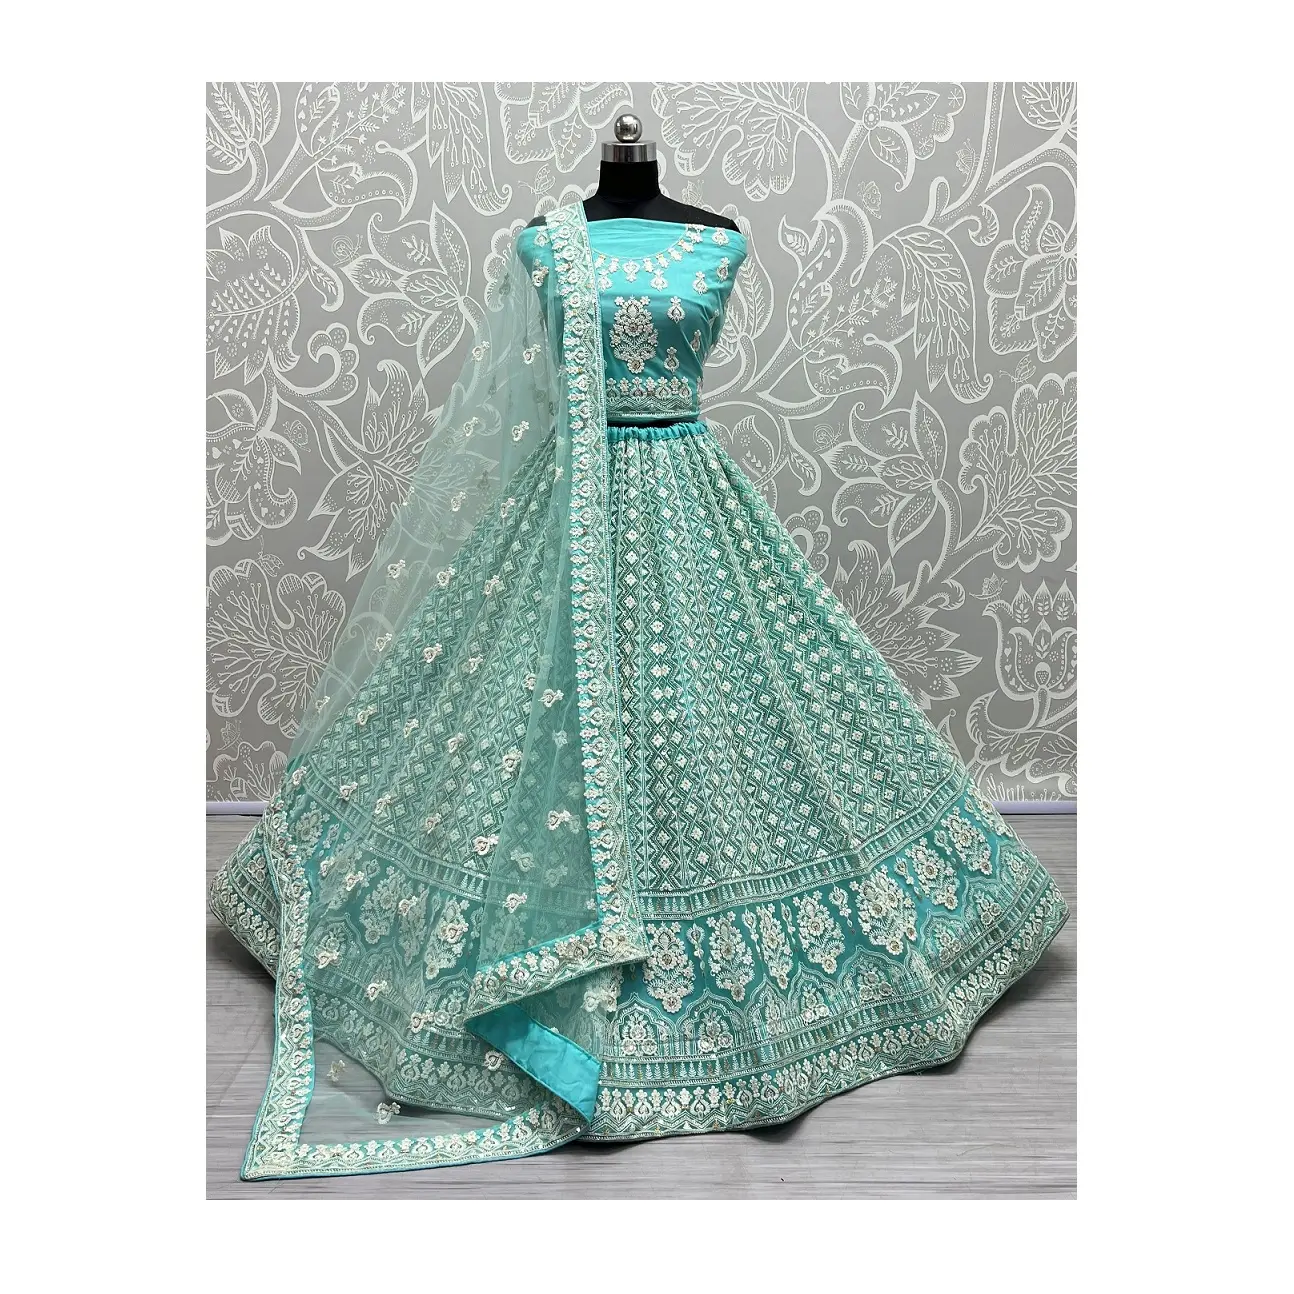 High on Demand Designer Lehnga Choli for Wedding and Party Celebration Available at Wholesale Price from India